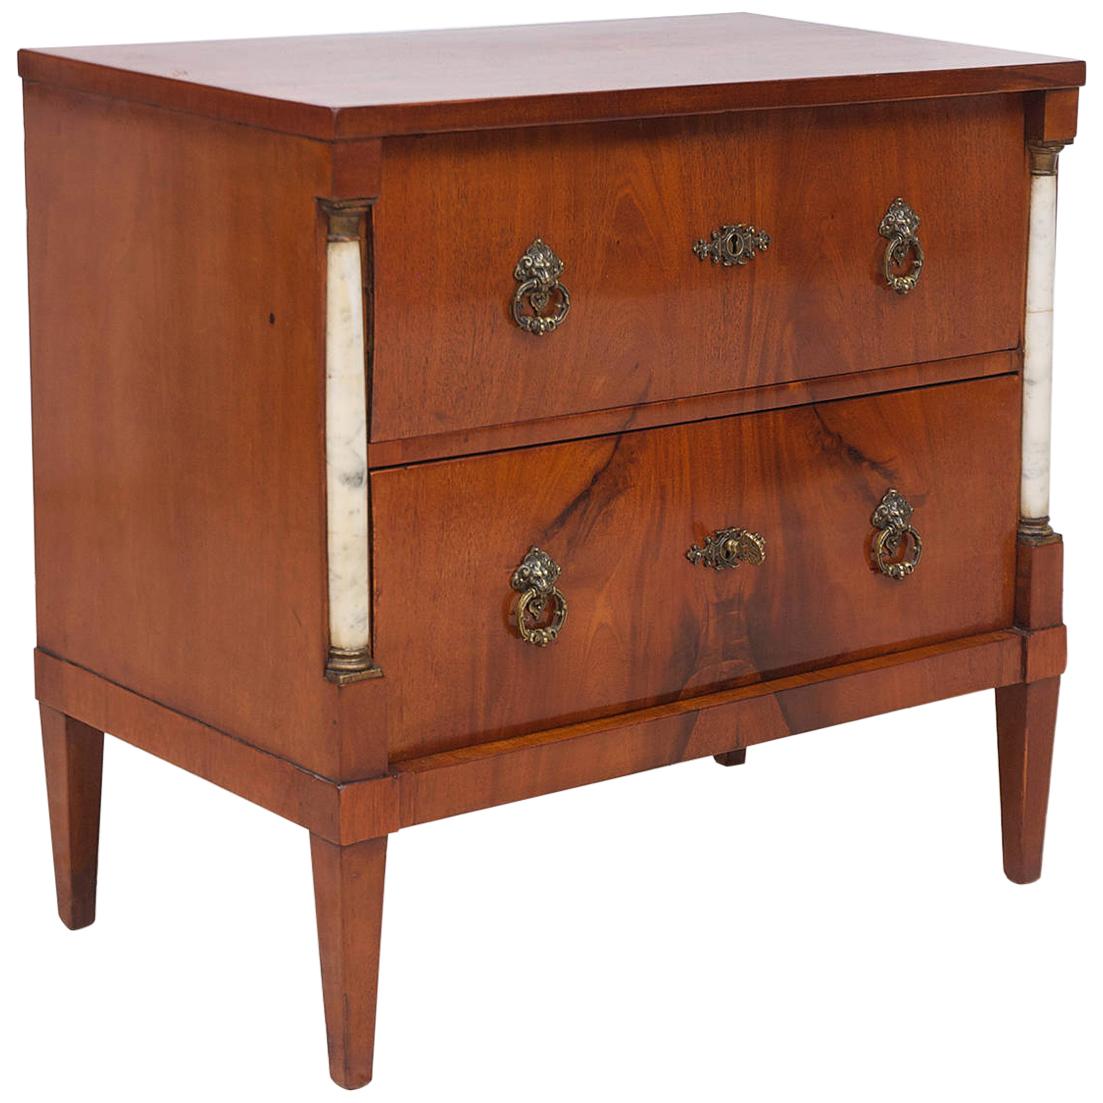 Small Empire Chest of Drawers in Mahogany with Marble Columns, Sweden, c. 1790 For Sale